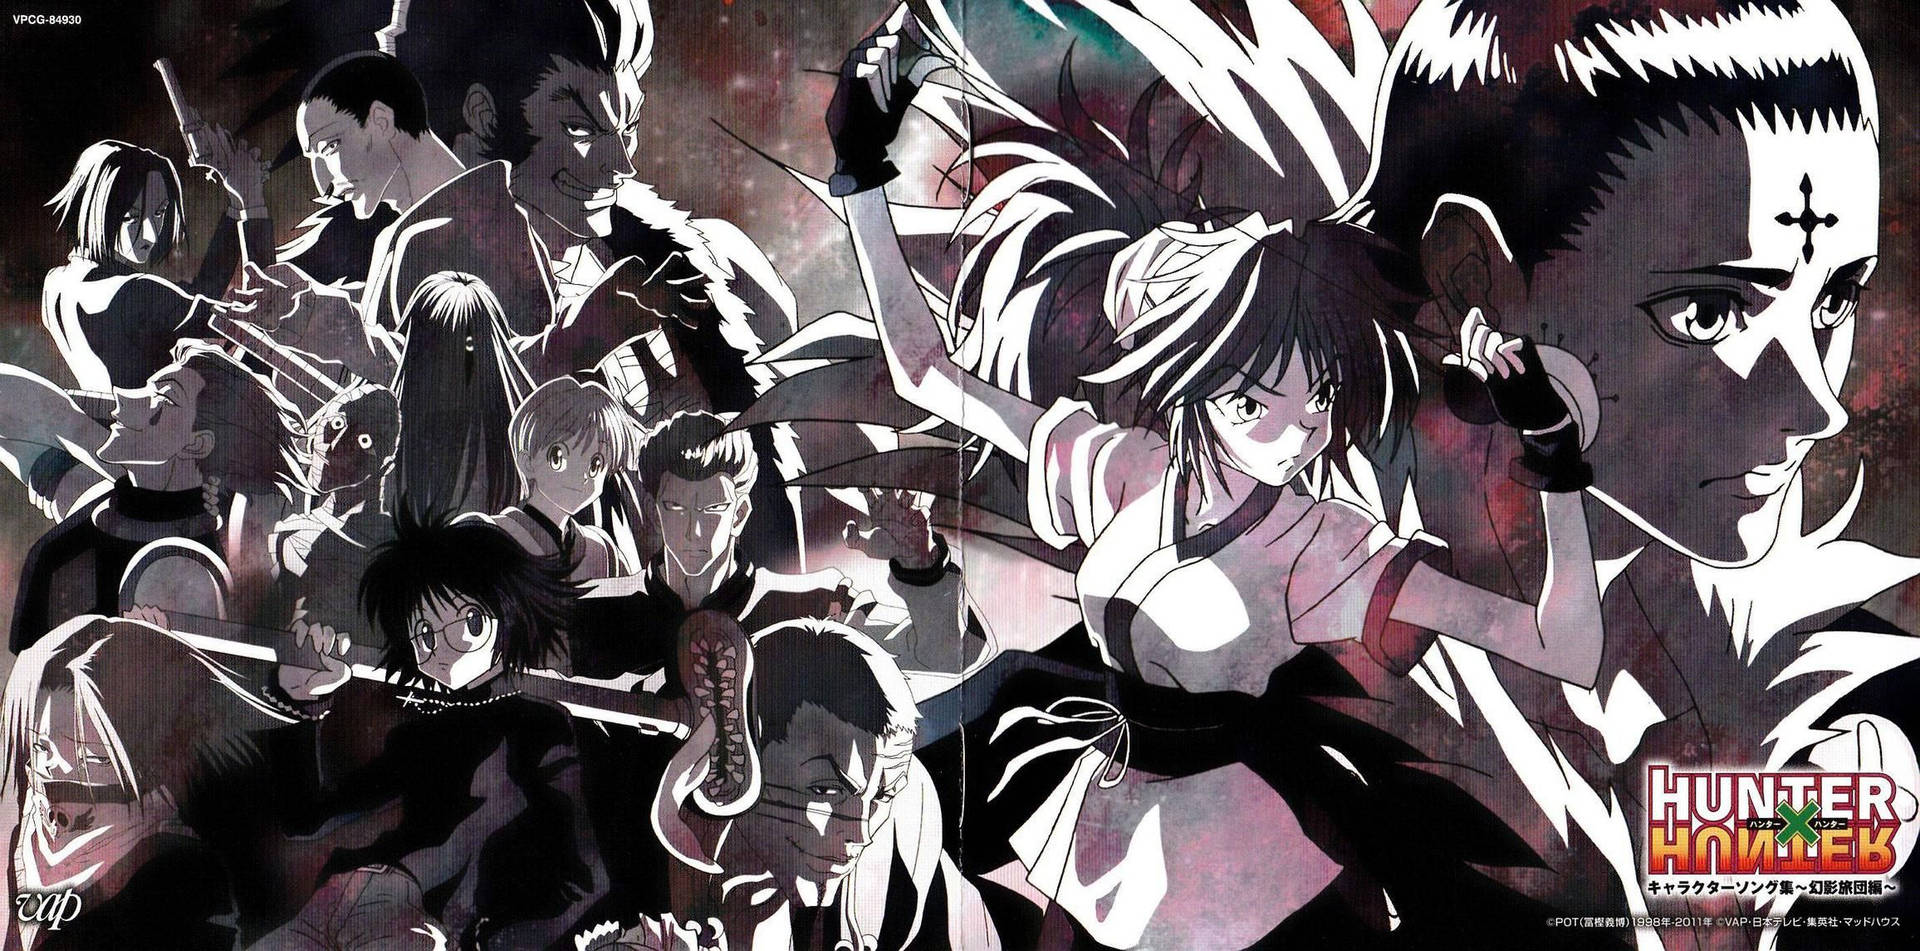 “The Phantom Troupe's power and ferocity is unrivaled” Wallpaper